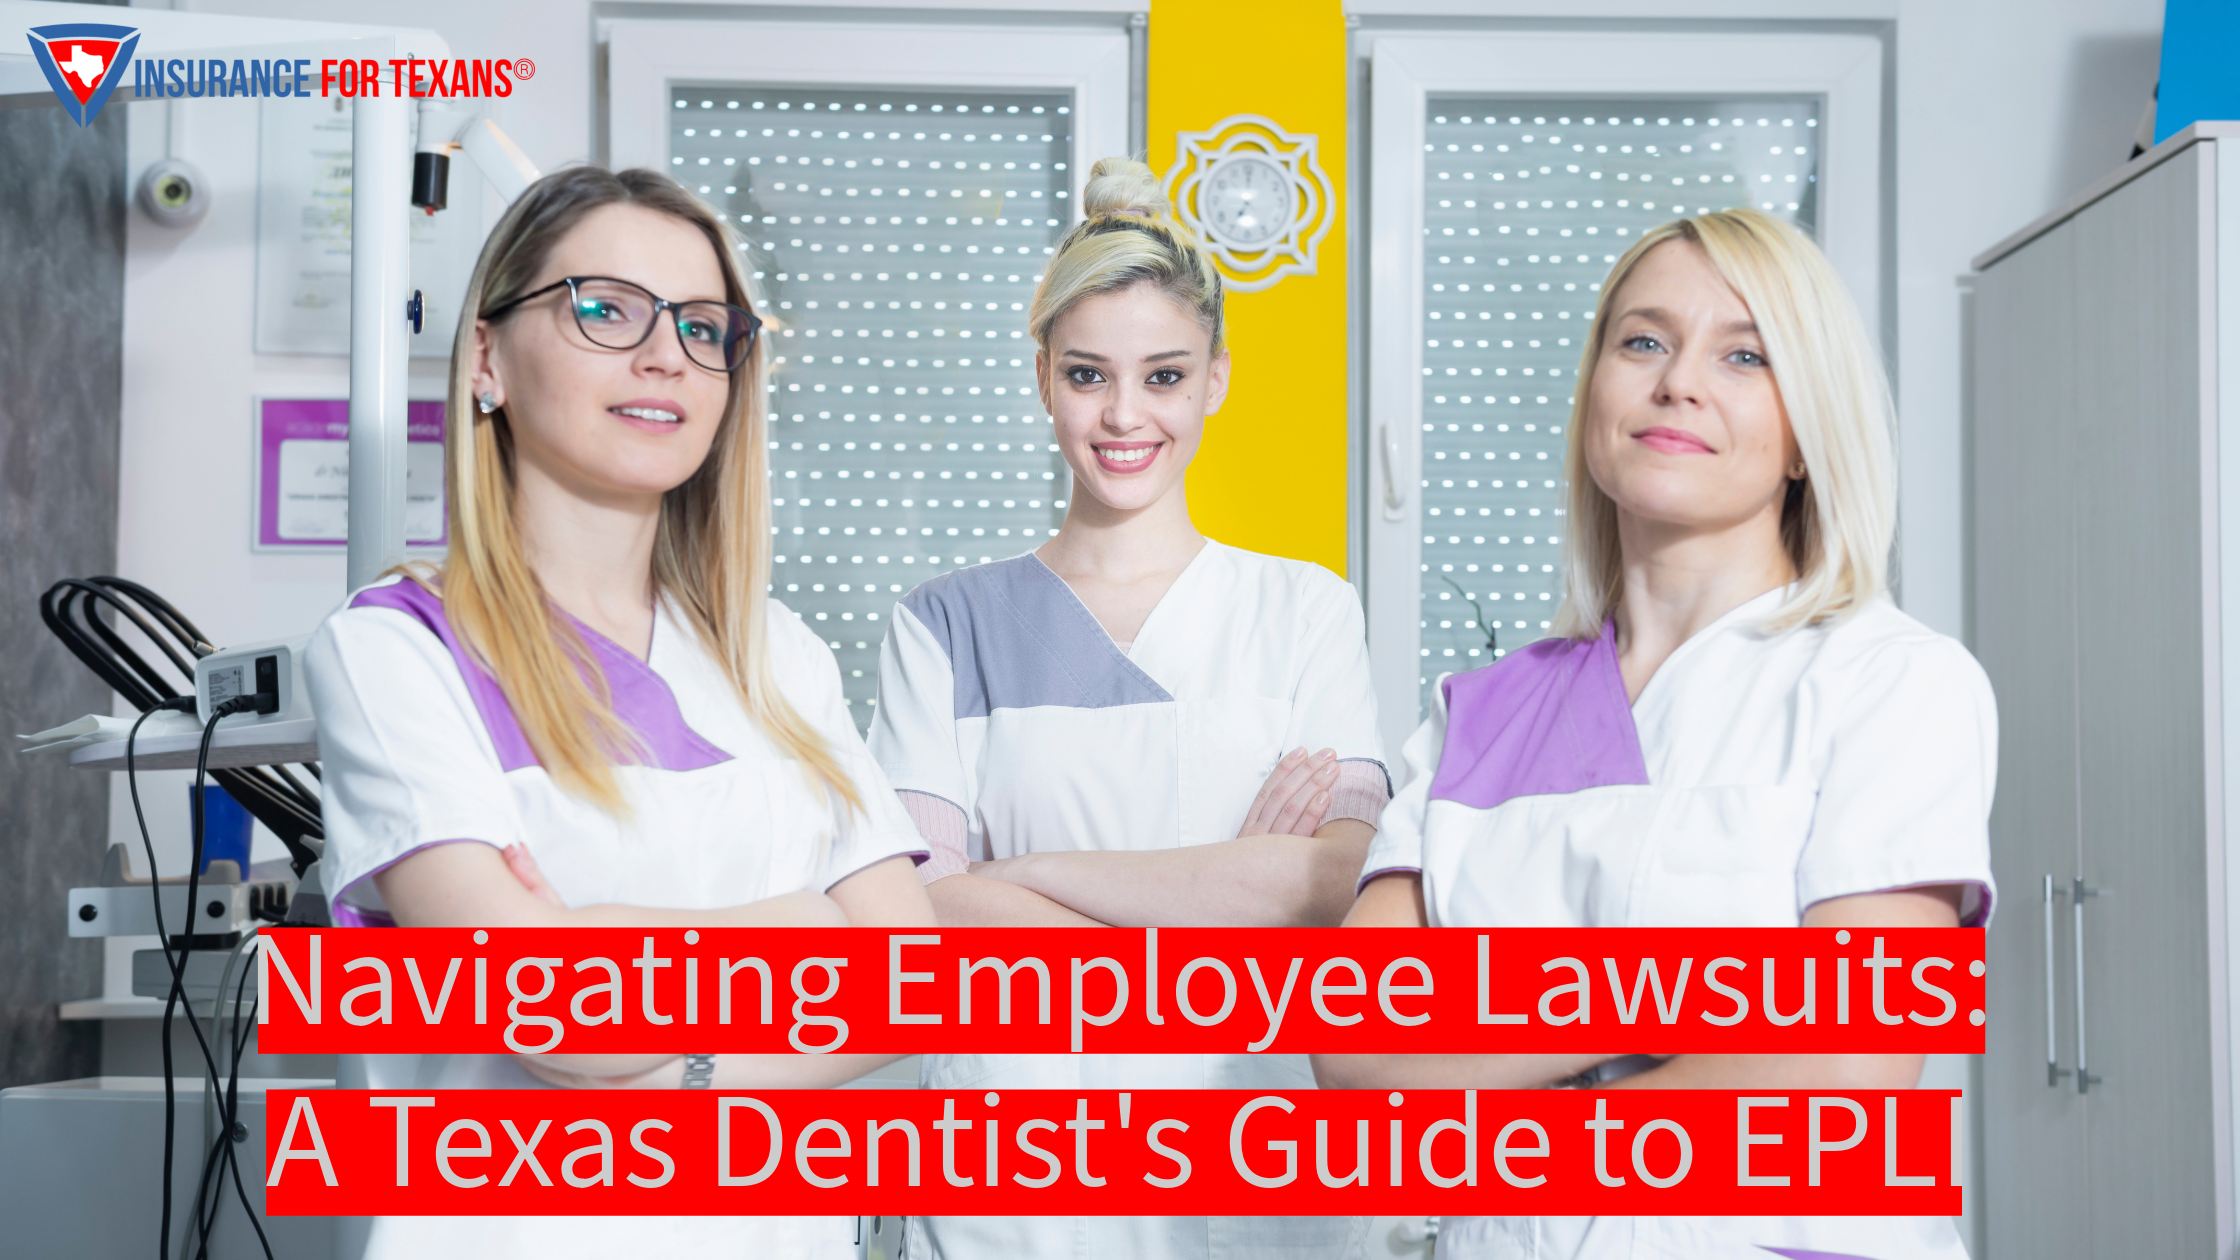 Navigating Employee Lawsuits: A Texas Dentist's Guide to EPLI